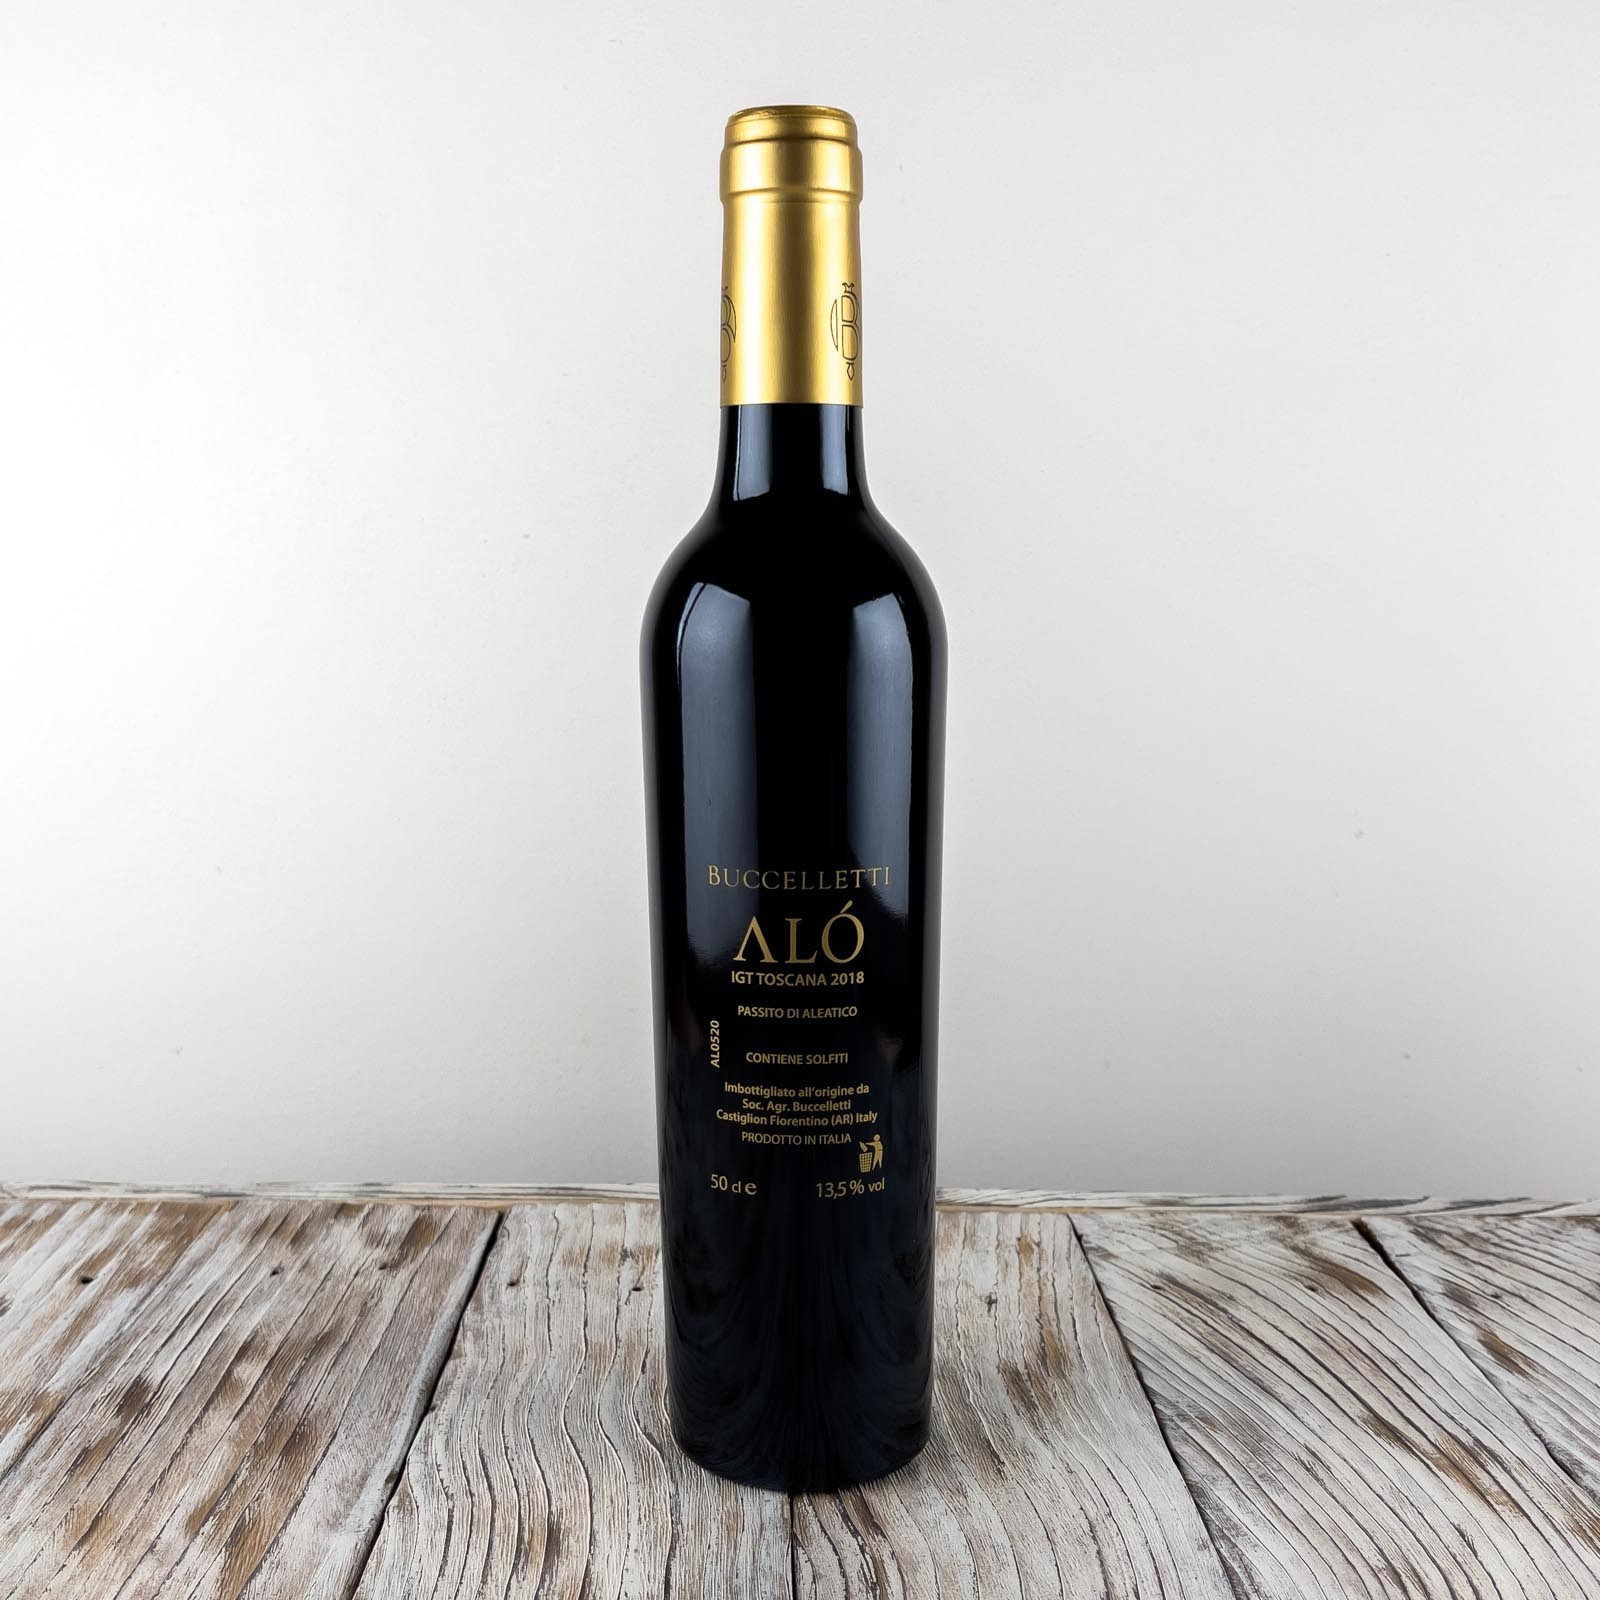 “Alò” di Buccelletti is a fruity tuscan passito wine with a full flavor.